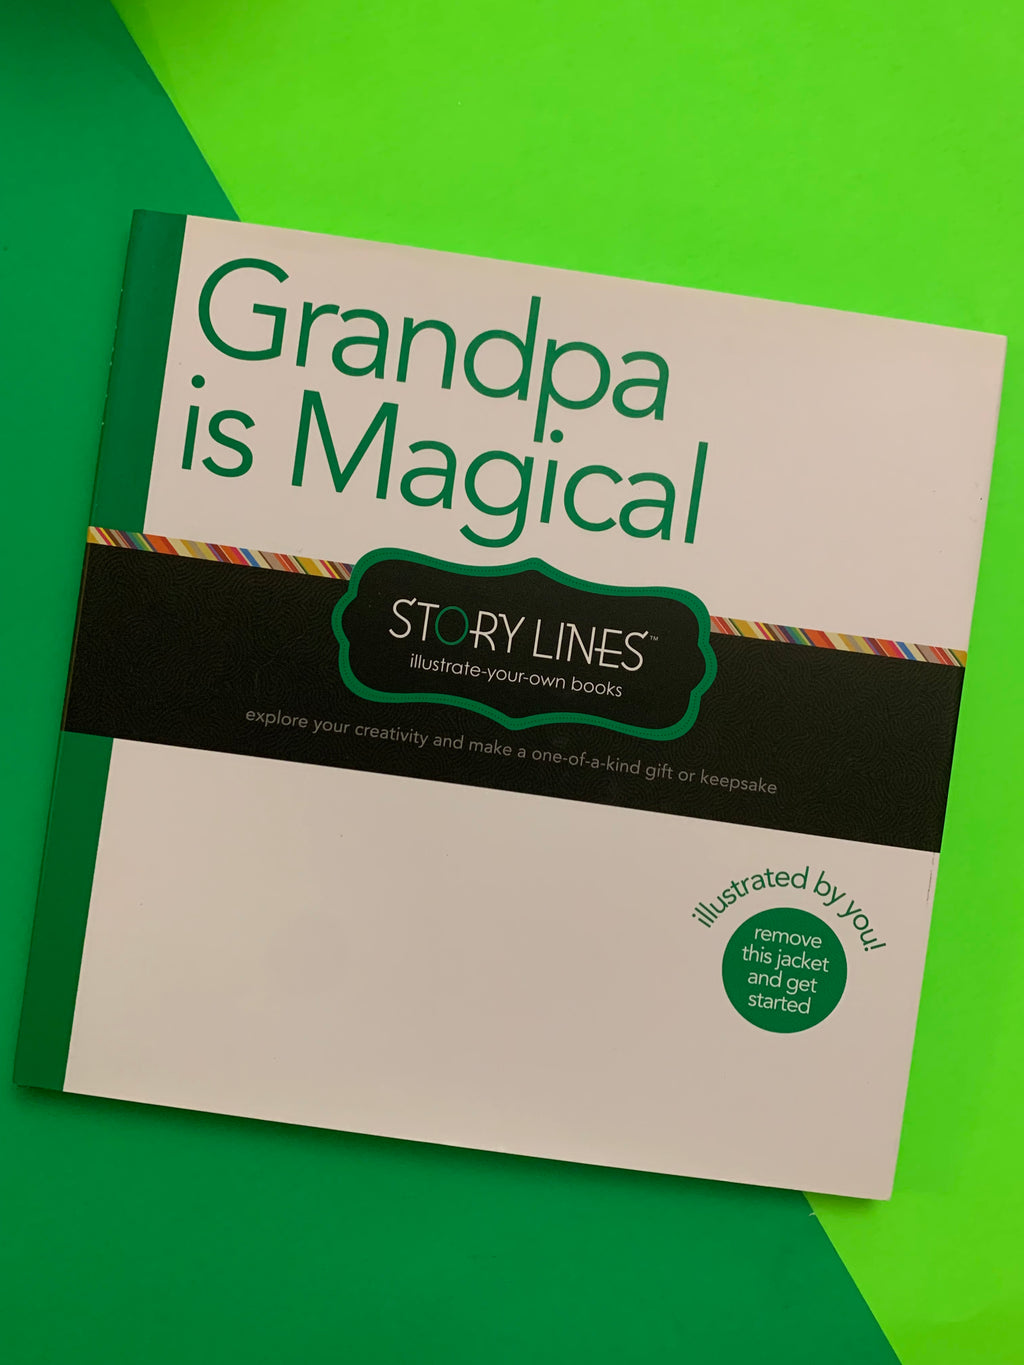 Story Lines: Grandpa is Magical — An illustrate-your-own book for kids